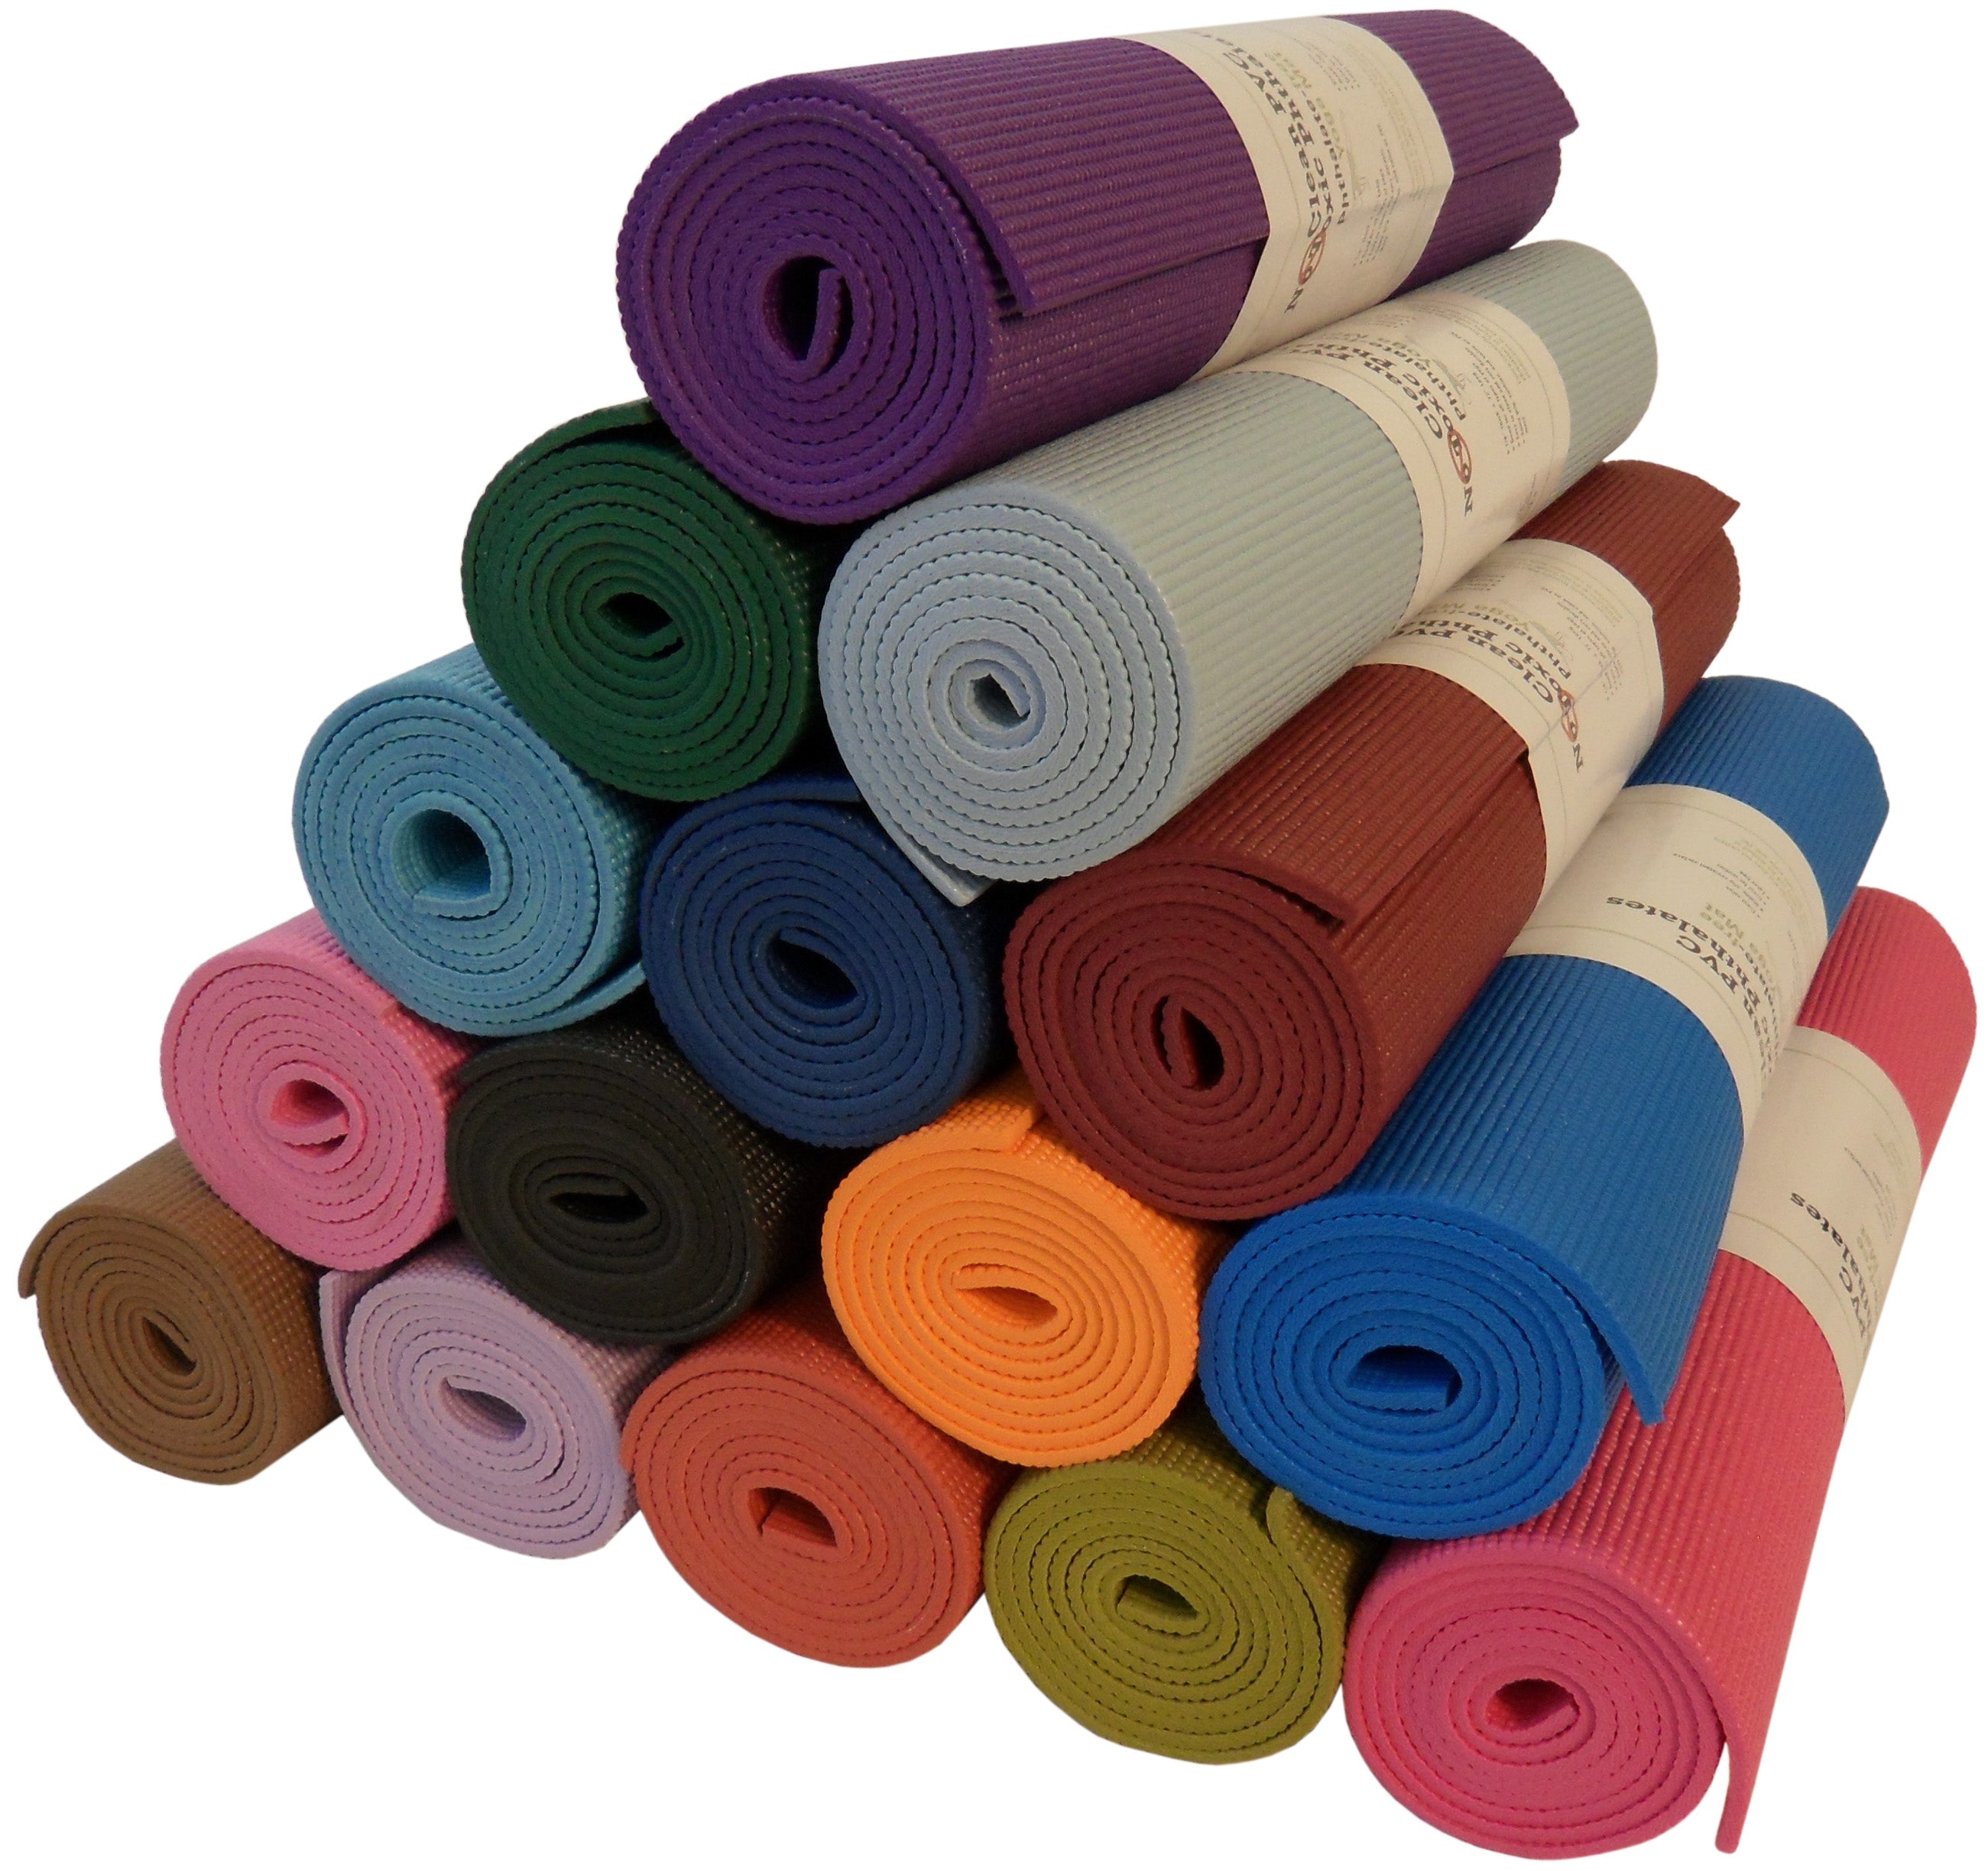 Yoga Monster Mat - Phthalate Free - 6mm thick